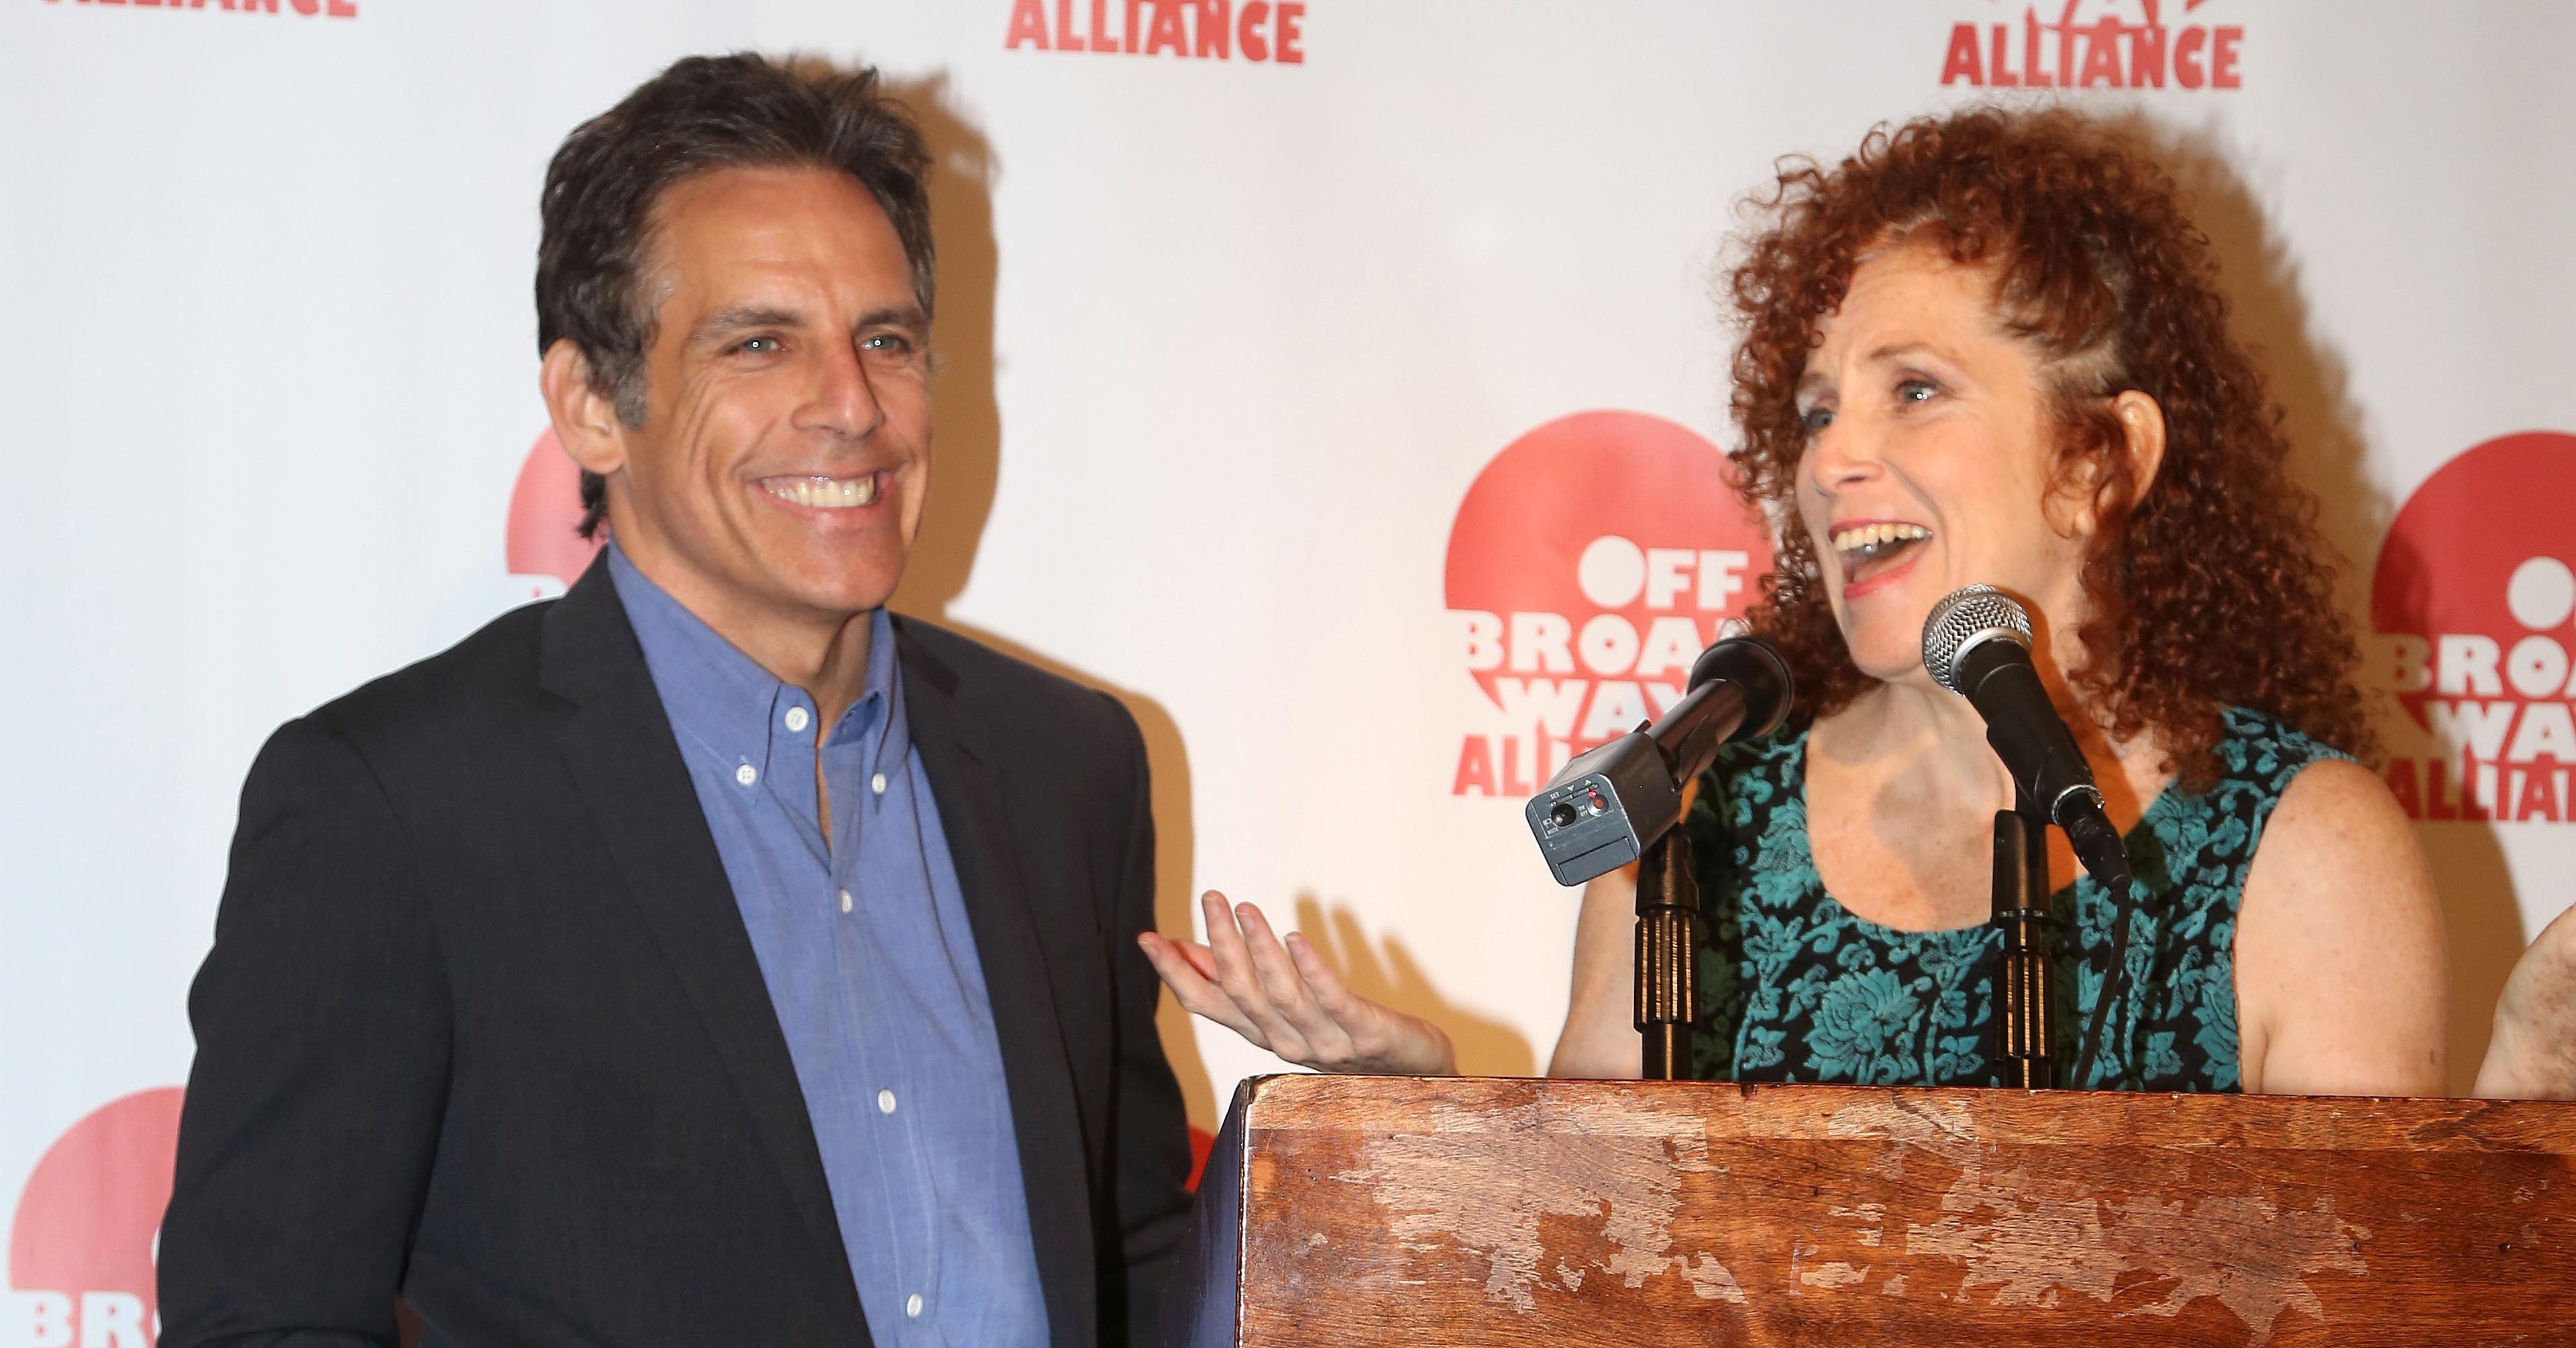 Who Is Ben Stiller S Sister Meet Actress And Comedian Amy Stiller His hariline is totally fake and his hair can be seen really puffy in one scene and sort of flat the next.you can only accomplish that with a brother in latin is 'fratris'. meet actress and comedian amy stiller